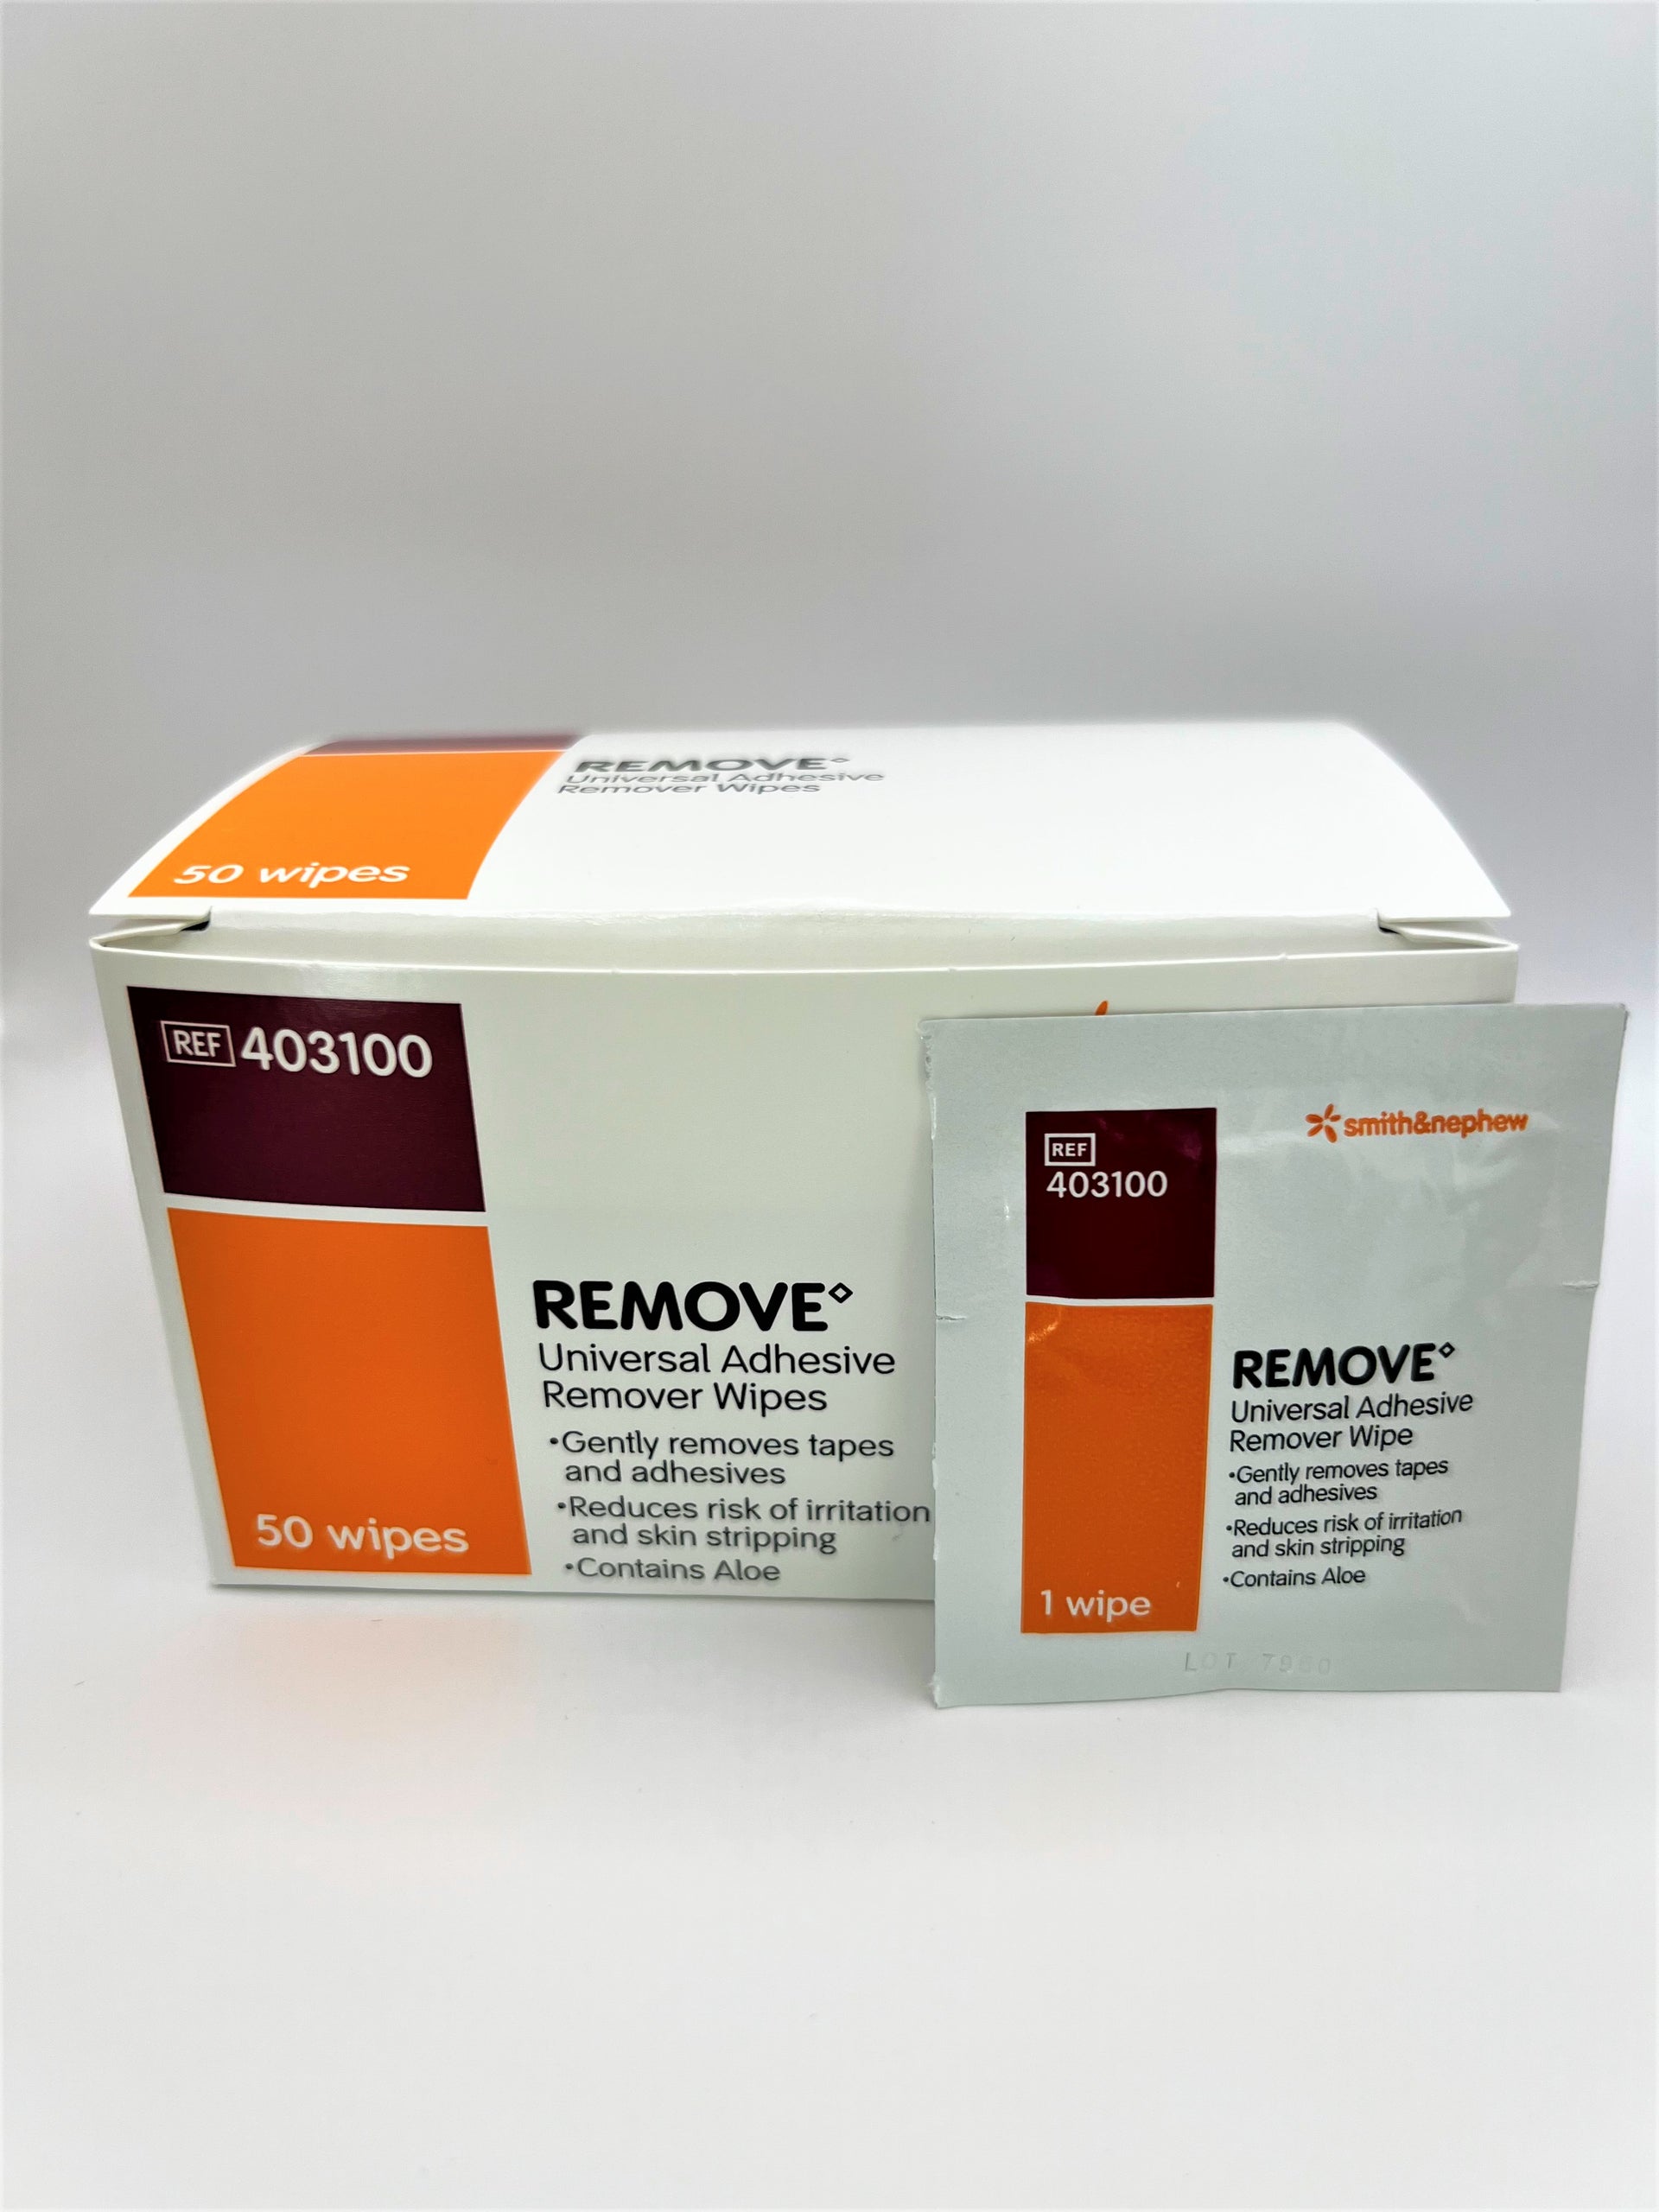 Adhesive Remover Wipes - Box of 50